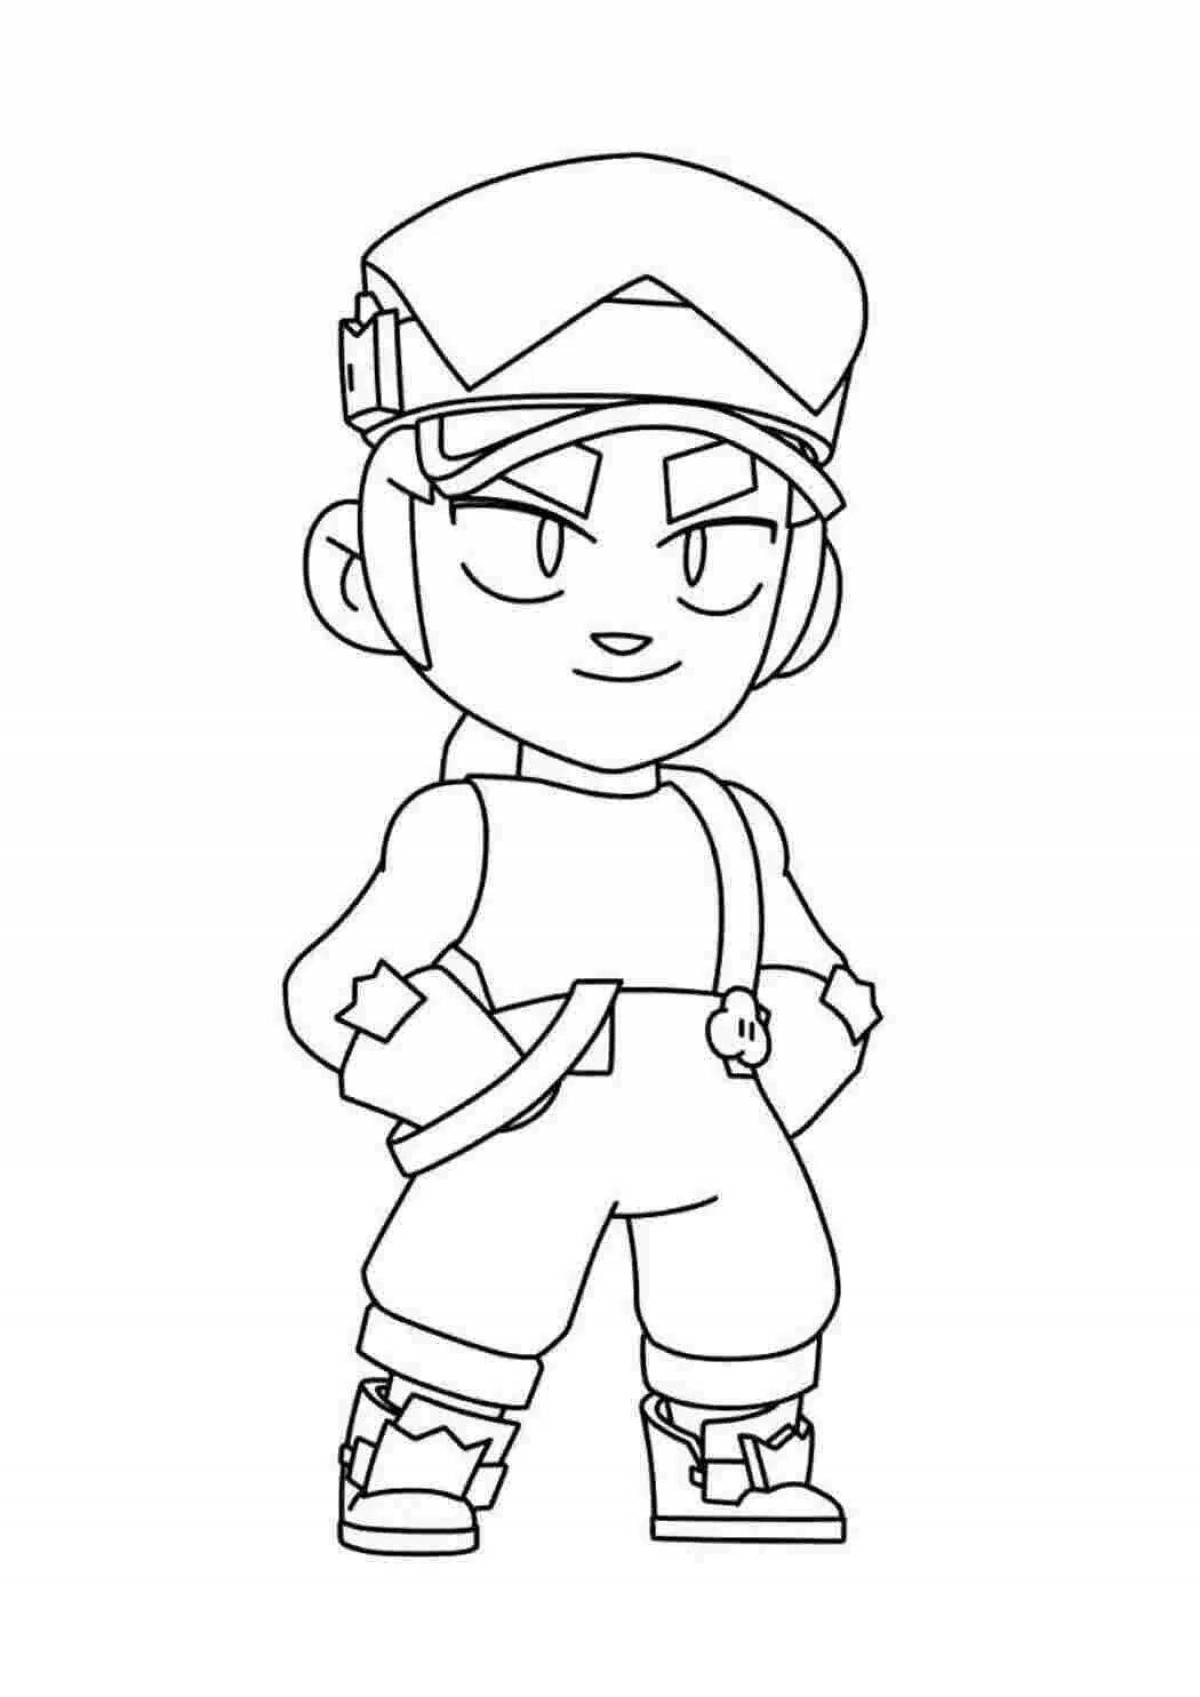 Coloring playful sam from brawl stars